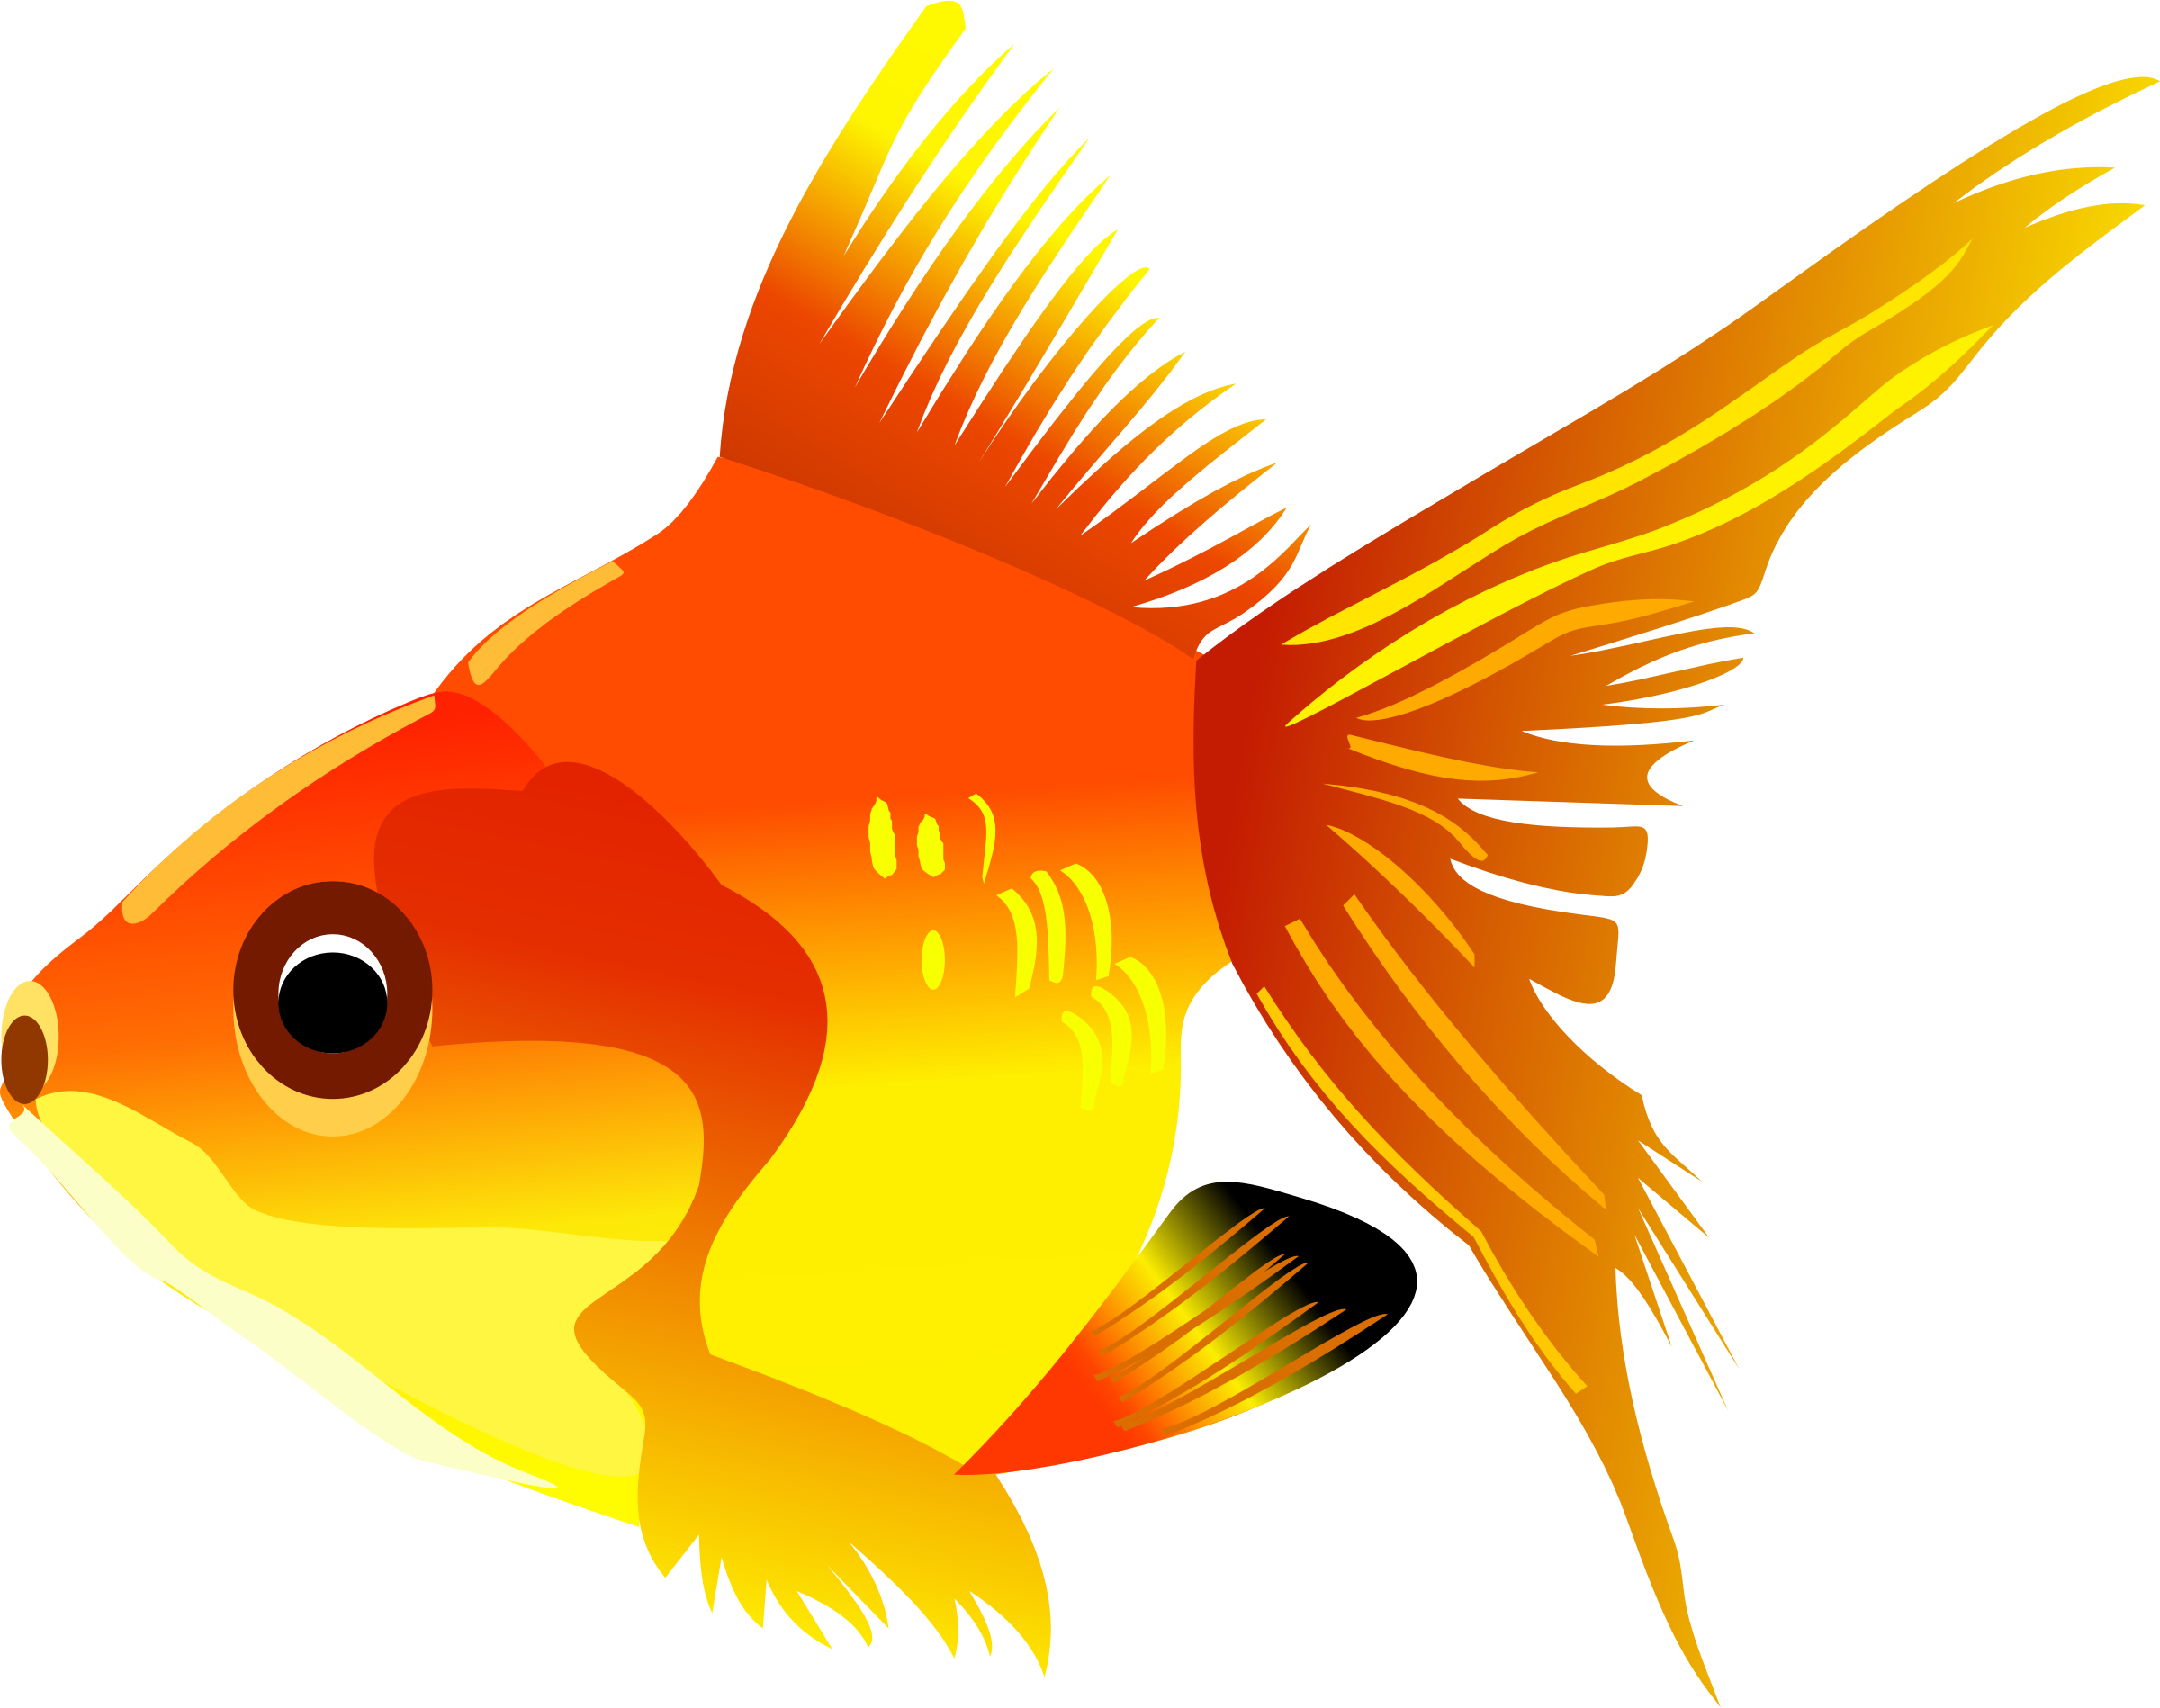 Icons big image png. Fish clipart icon